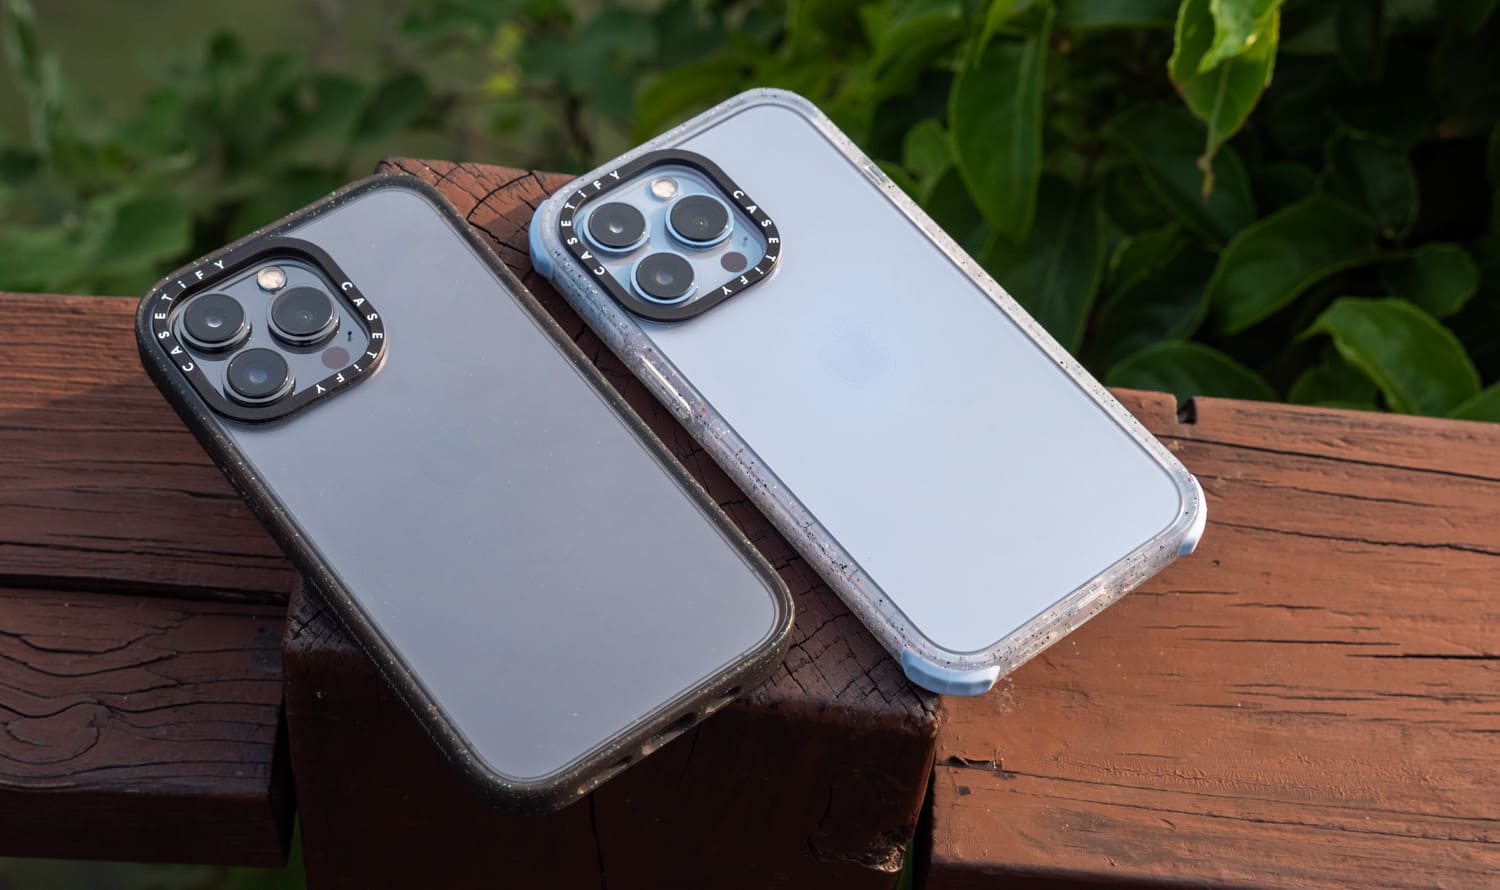 The fall-resistant rebuilt mobile phone case from the RECASETiFY project